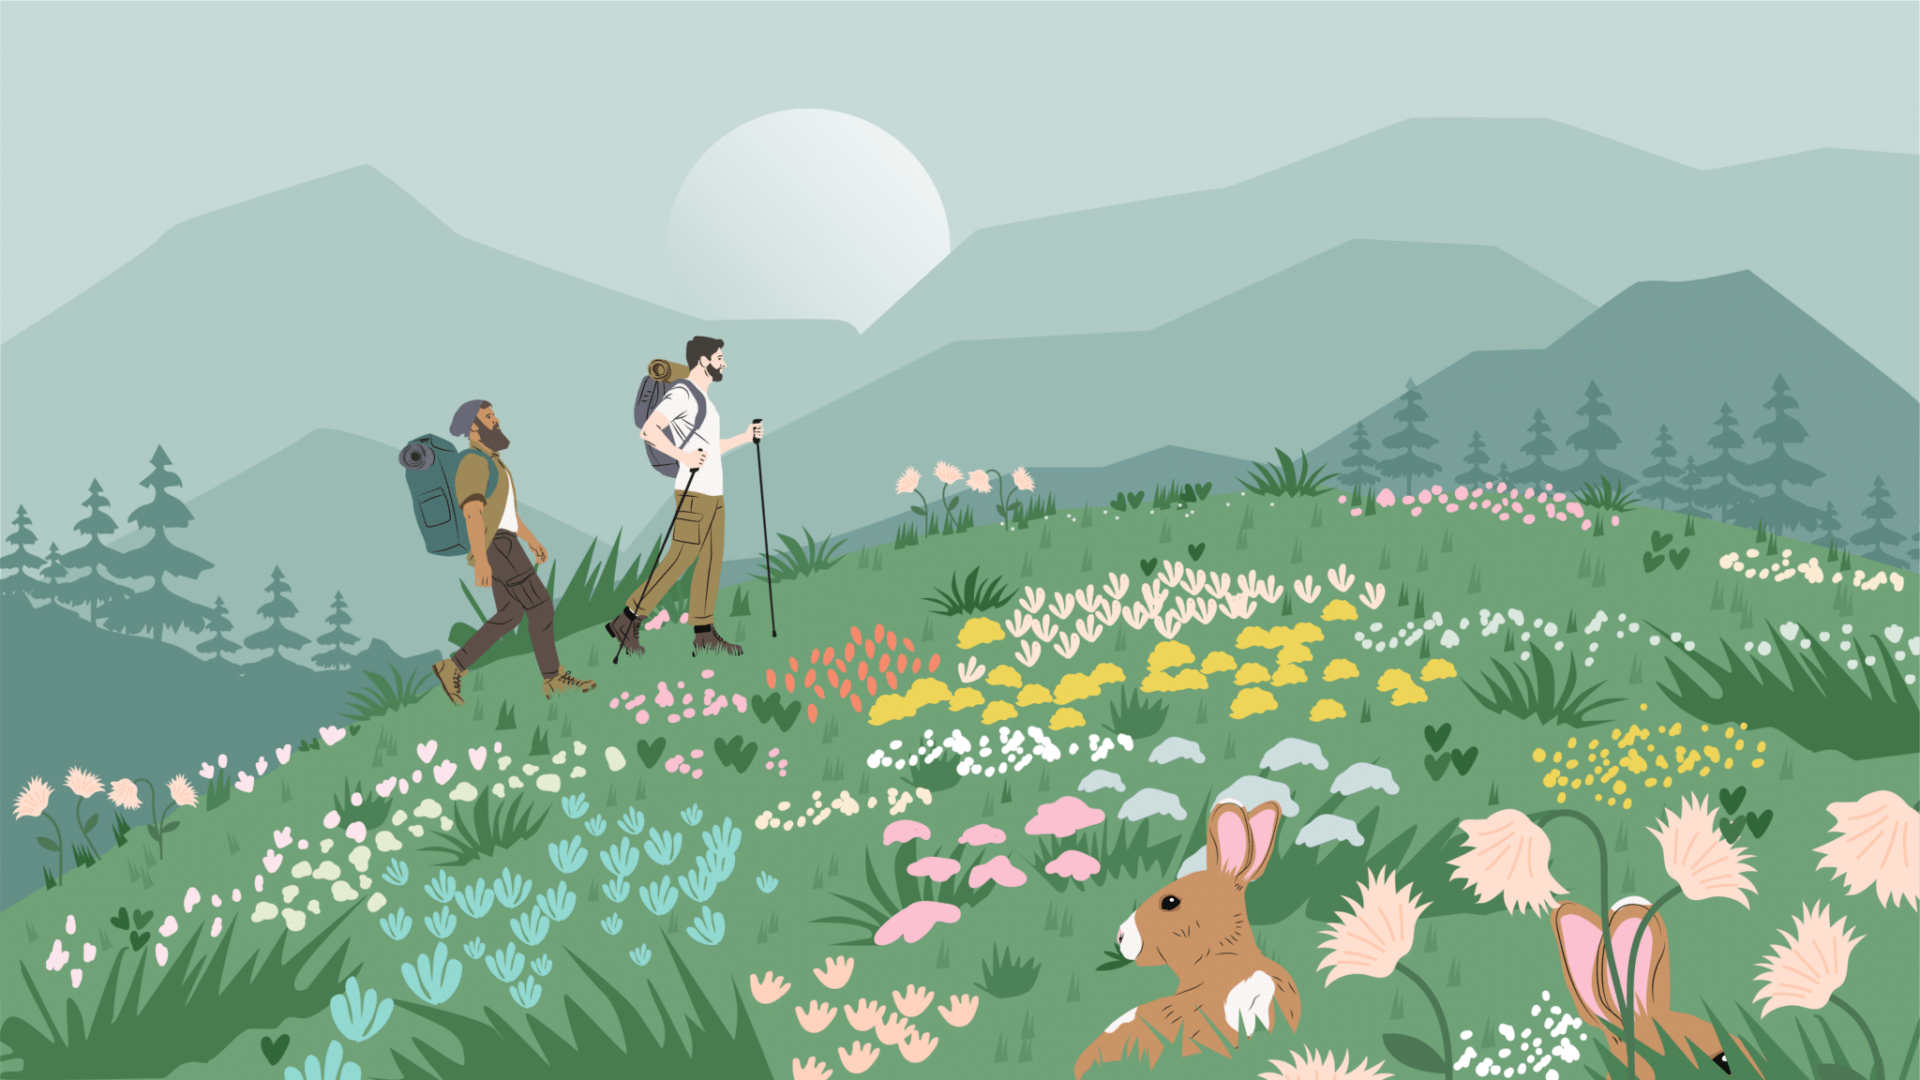 Illustration of two mountain hikers walking a field of wildflowers with two rabbits.